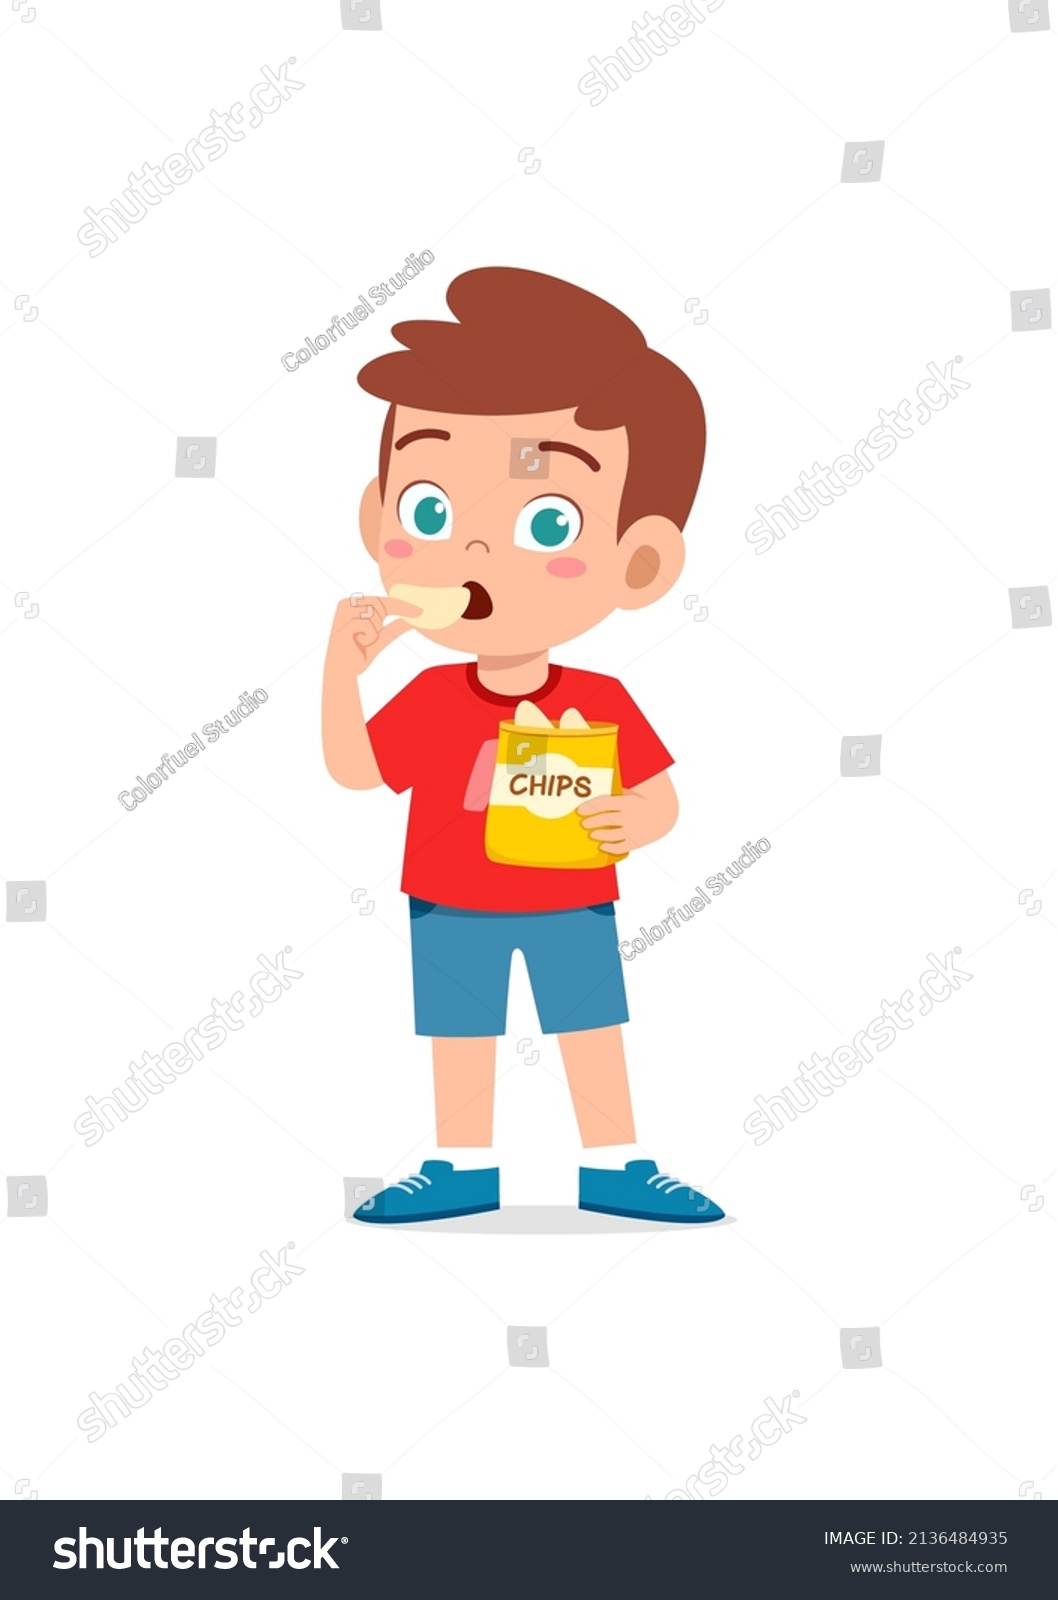 3,108 Boy eating chips Images, Stock Photos & Vectors | Shutterstock